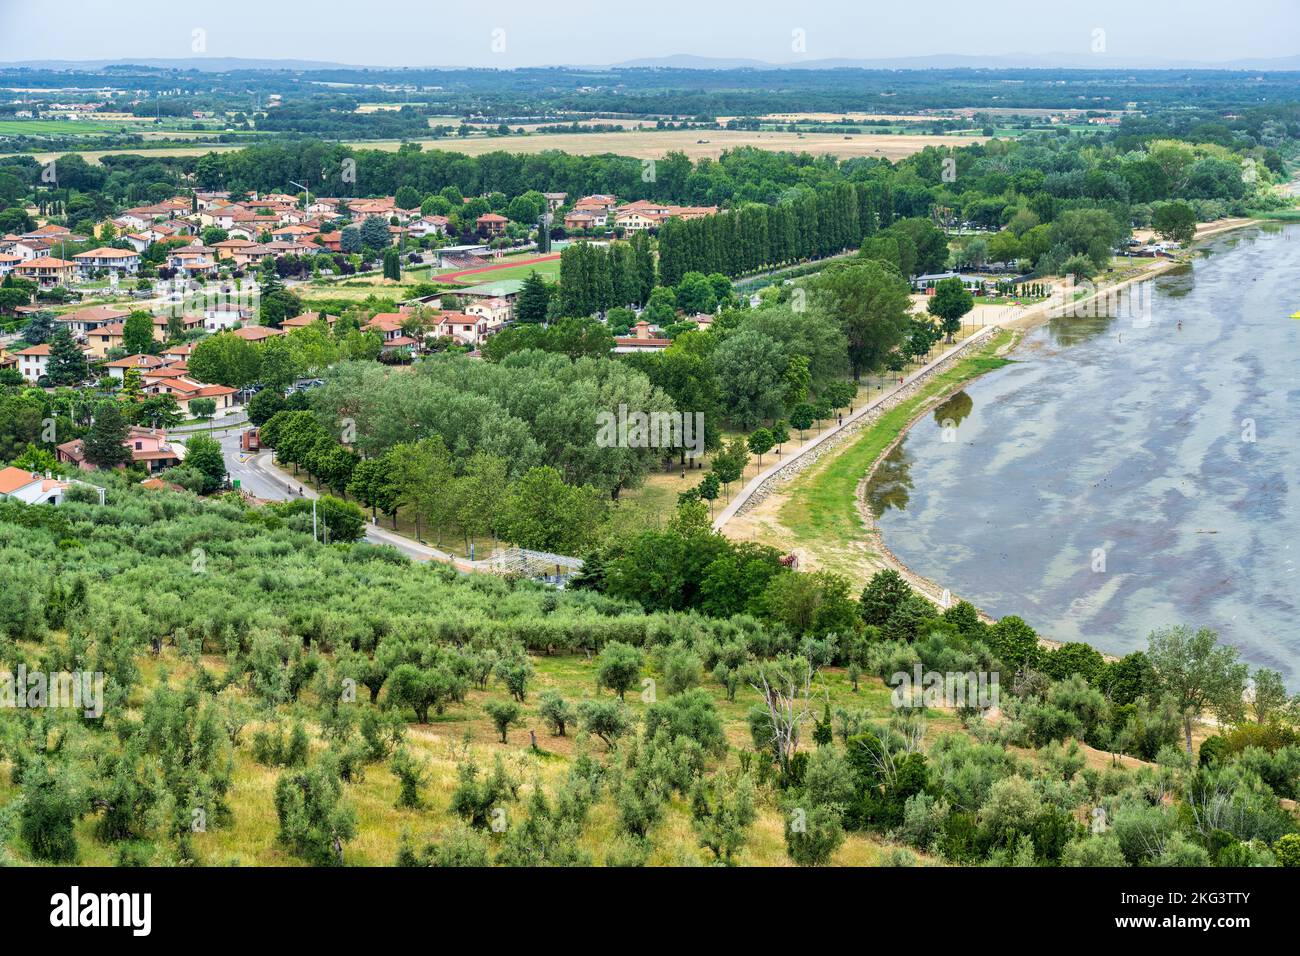 Aerial view looking down on the shore of Lake Trasimeno from the historic old town of Castiglione del Lago, Province of Perugia, Umbria, Italy Stock Photo